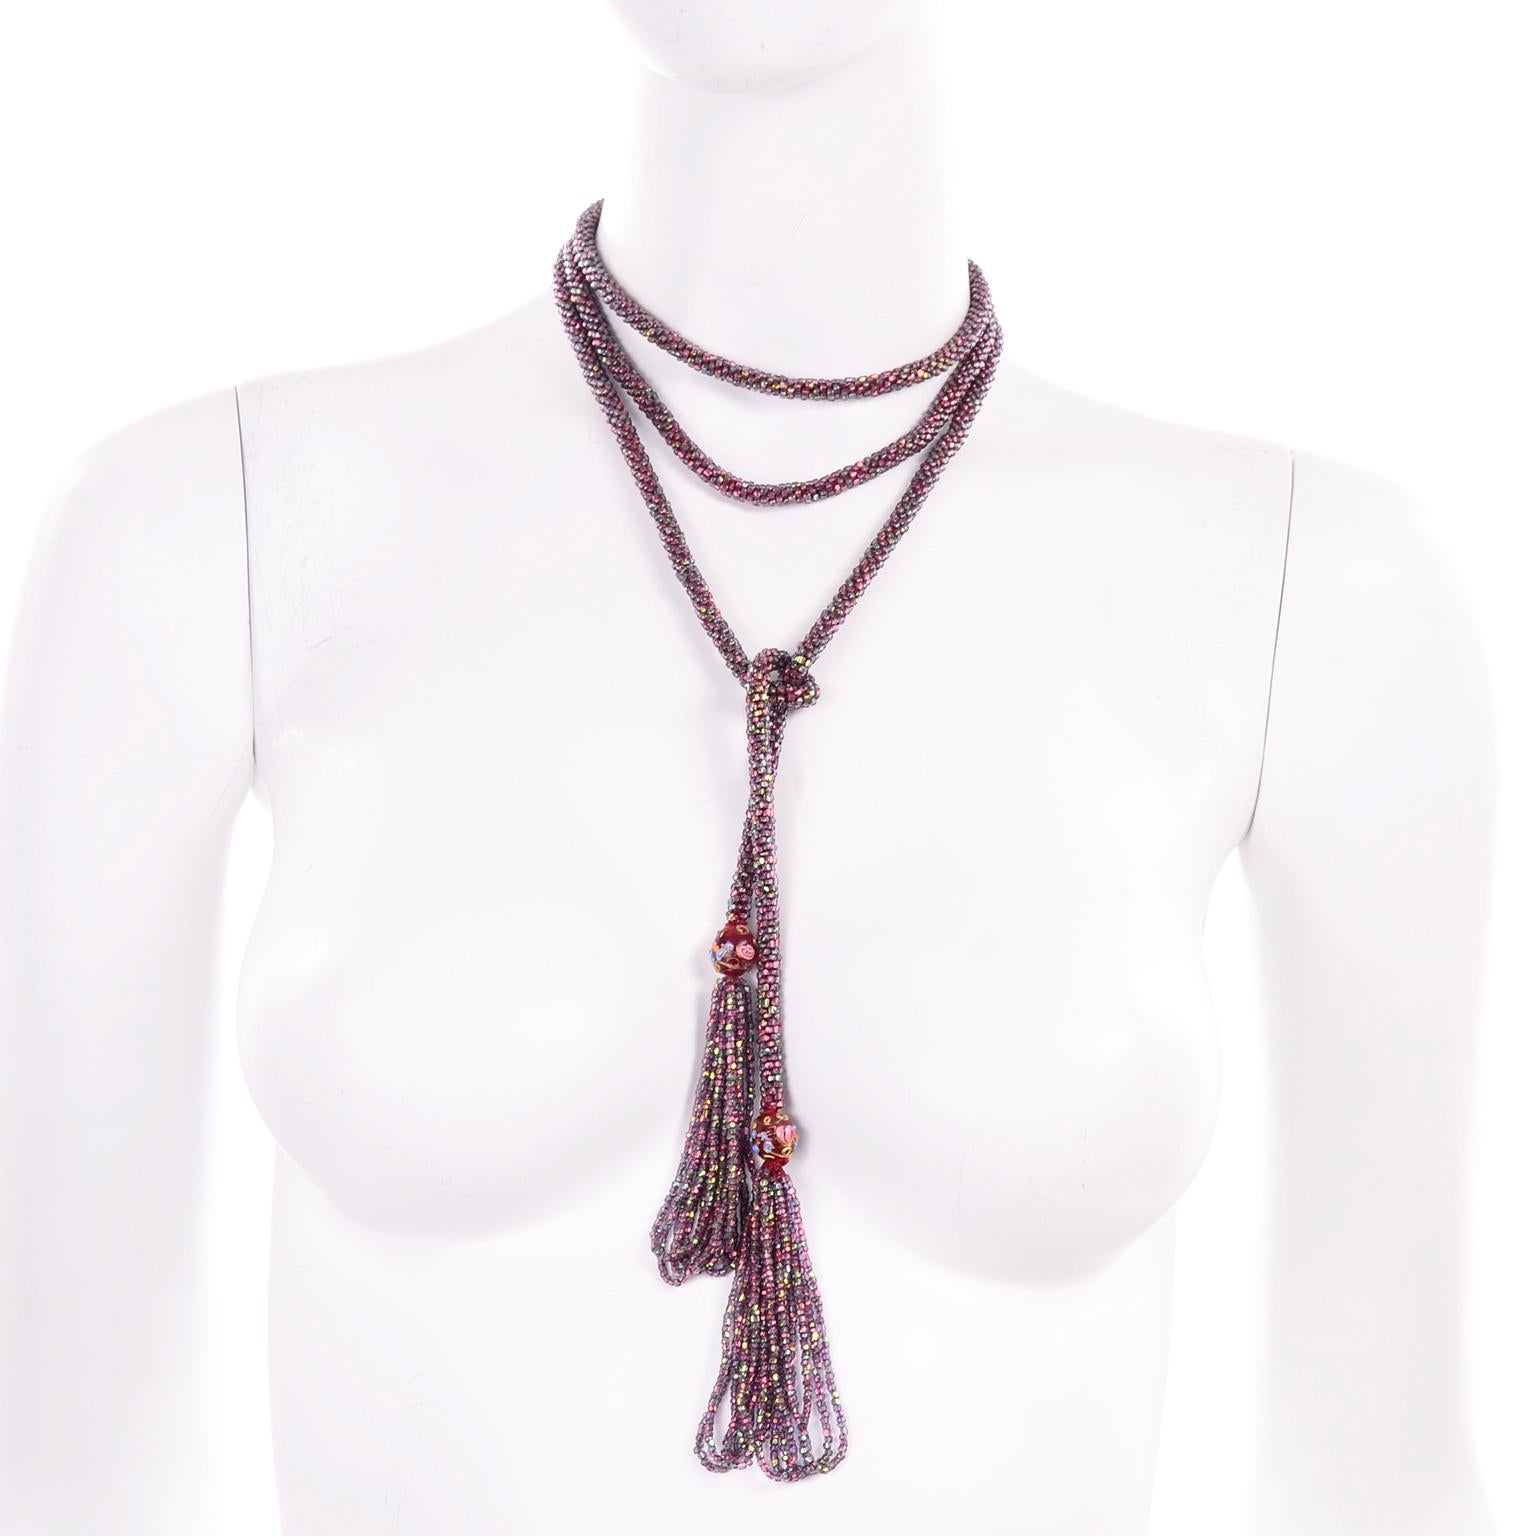 This is a lovely iridescent purple and red beaded flapper tassel necklace with fringed ends and accent lampwork or wedding cake beads. The Sautoir rope style necklace measures 60